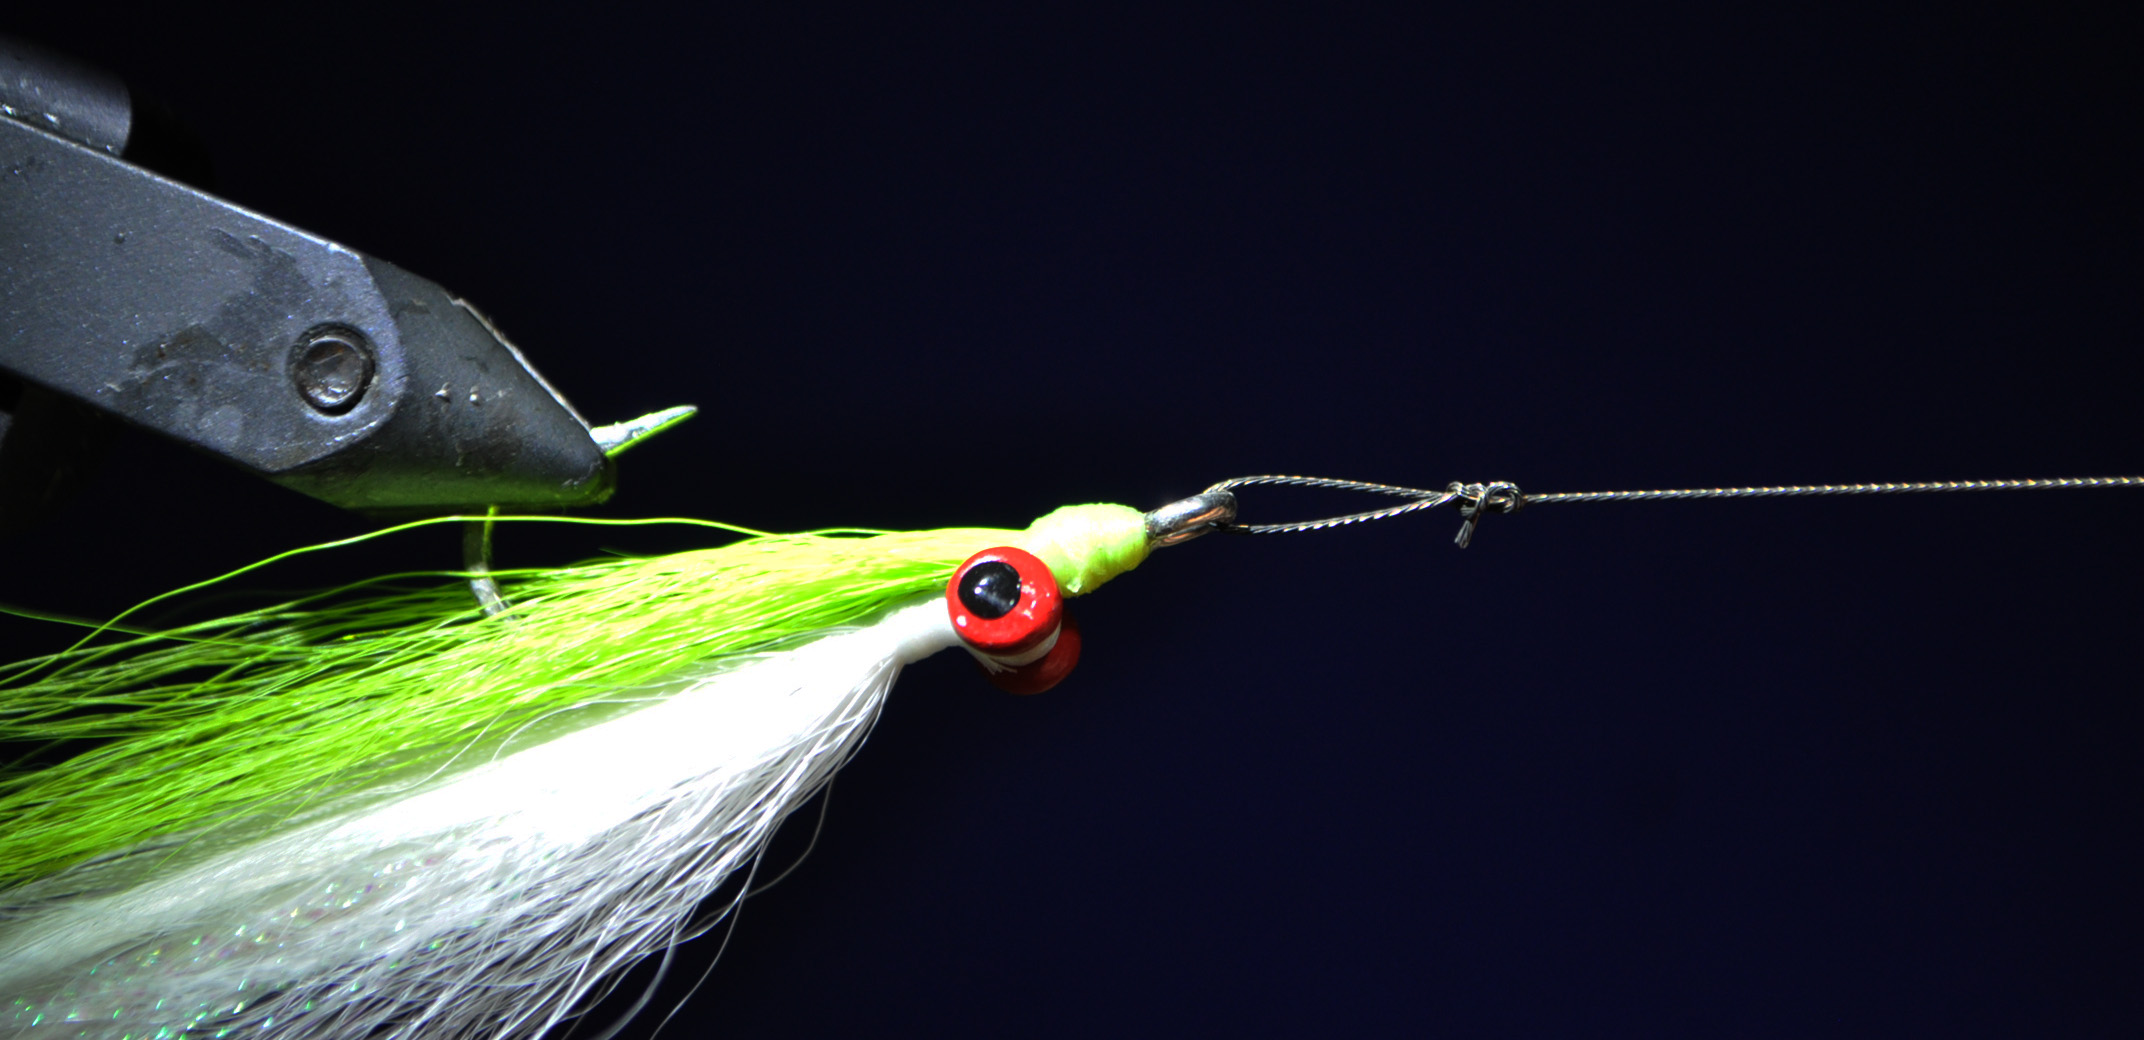 Tieable Wire Leader - In-Fisherman